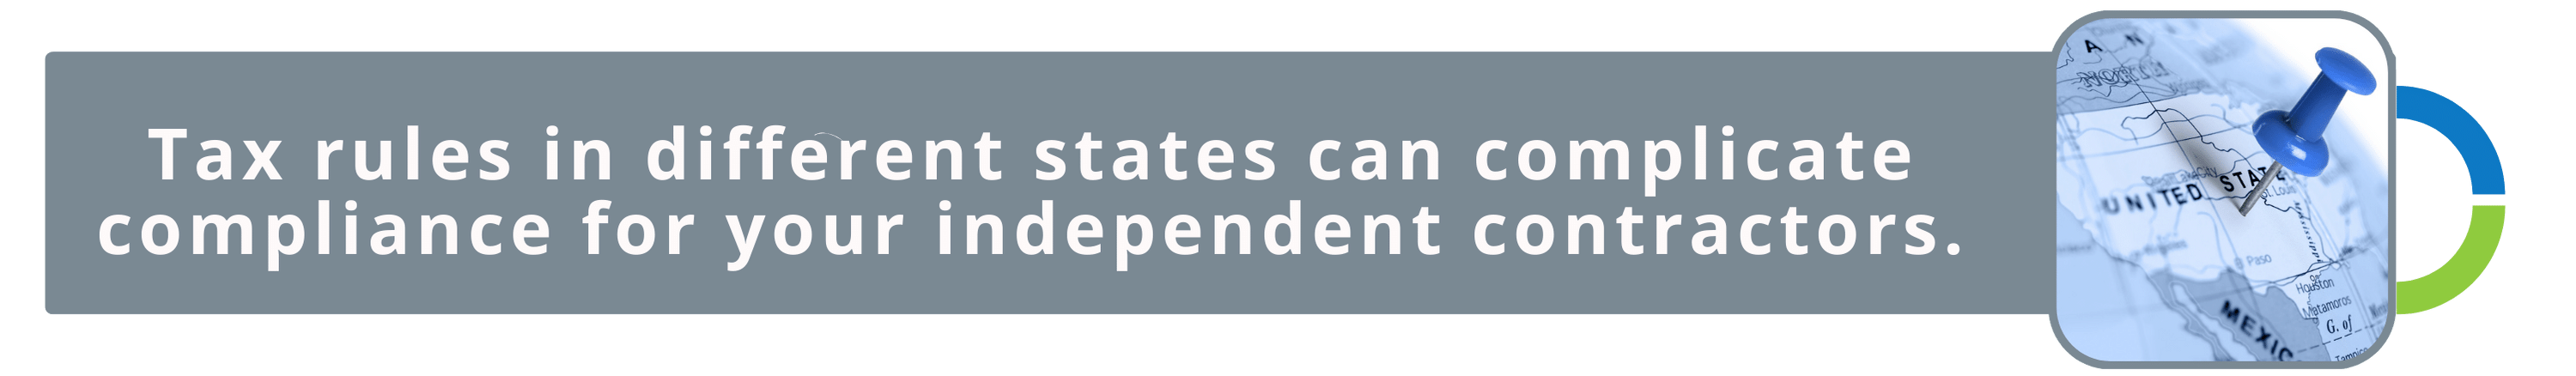 Tax-Rules-for-independent-contractors-differ-by-state-fusion-cpa